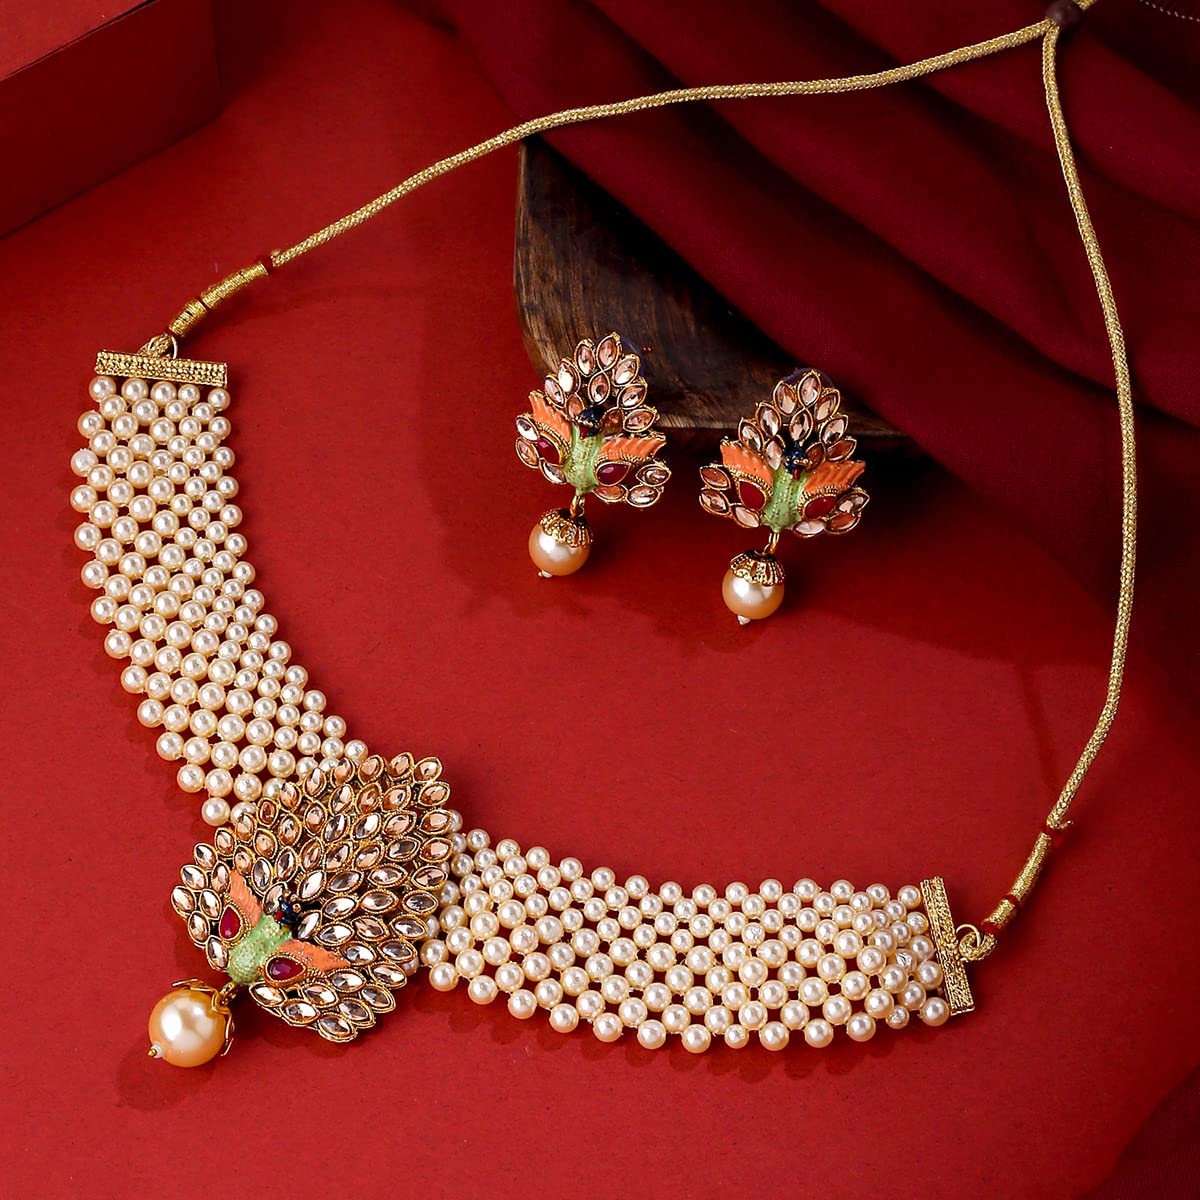 Yellow Chimes Jewellery Set for Women and Girls Kundan Necklaces Set | Gold Plated Beads Beaded Kundan Choker Necklace Set | Birthday Gift for girls and women Anniversary Gift for Wife